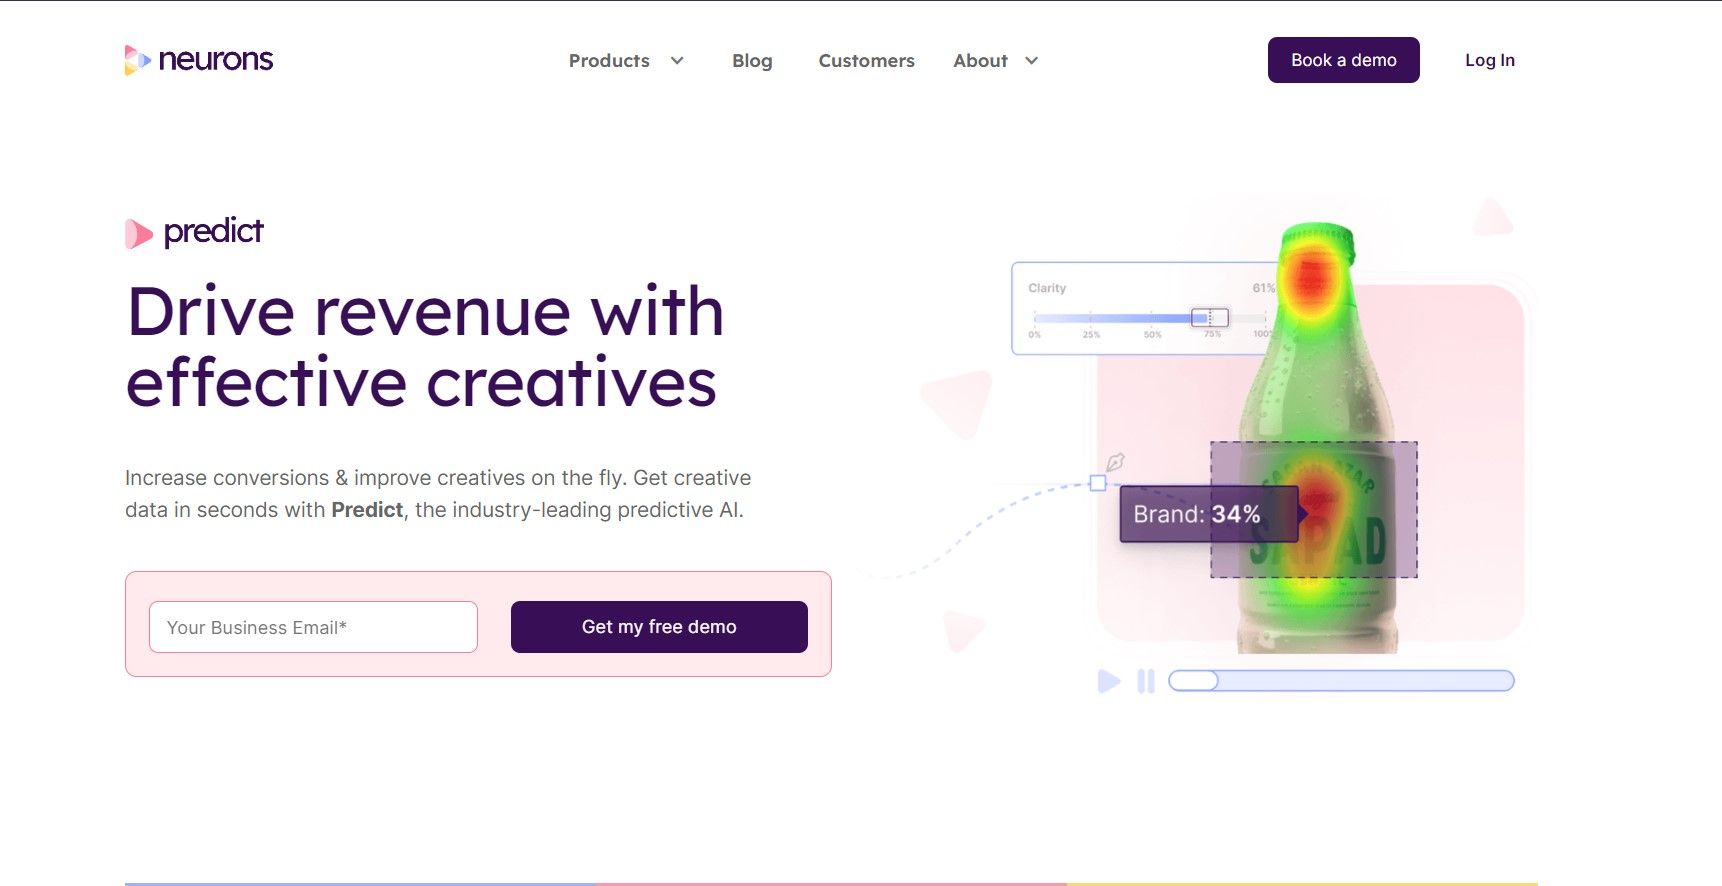 Predict AIThis tool predicts how customers will react to creative